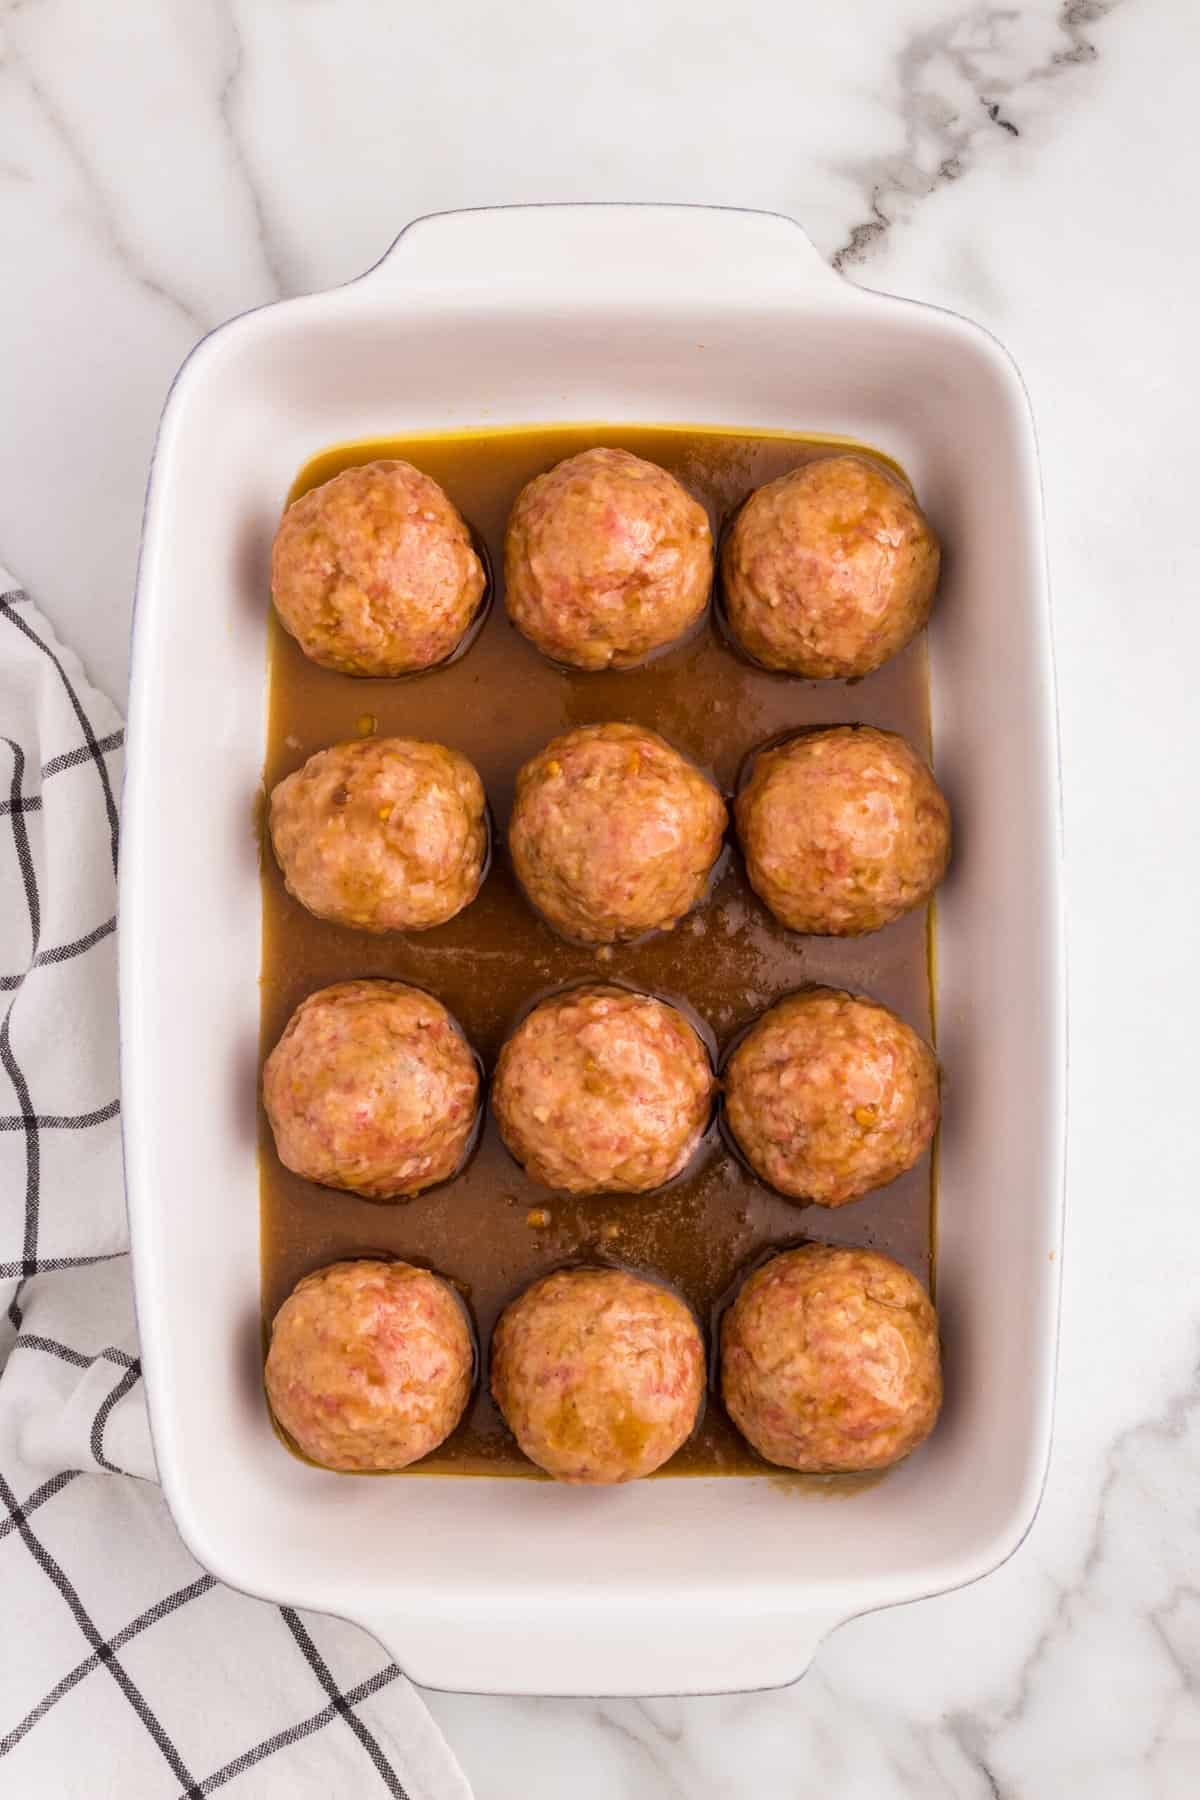 Ham Balls covered in glaze in 9x13 baking dish before baking